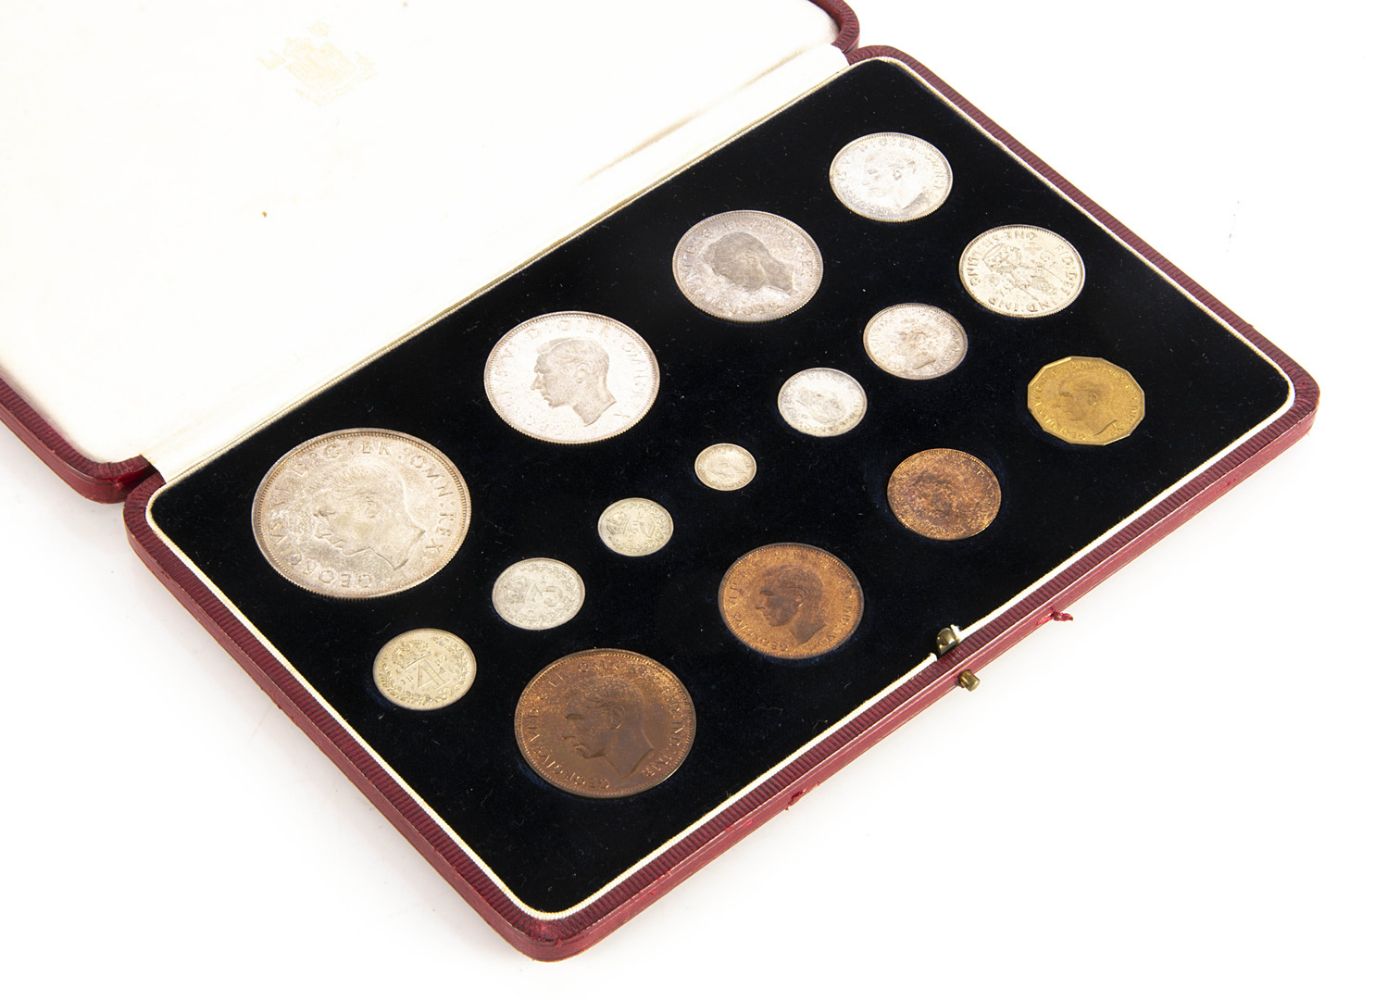 Jewellery, Watches, Pens, Coins & Silver Auction